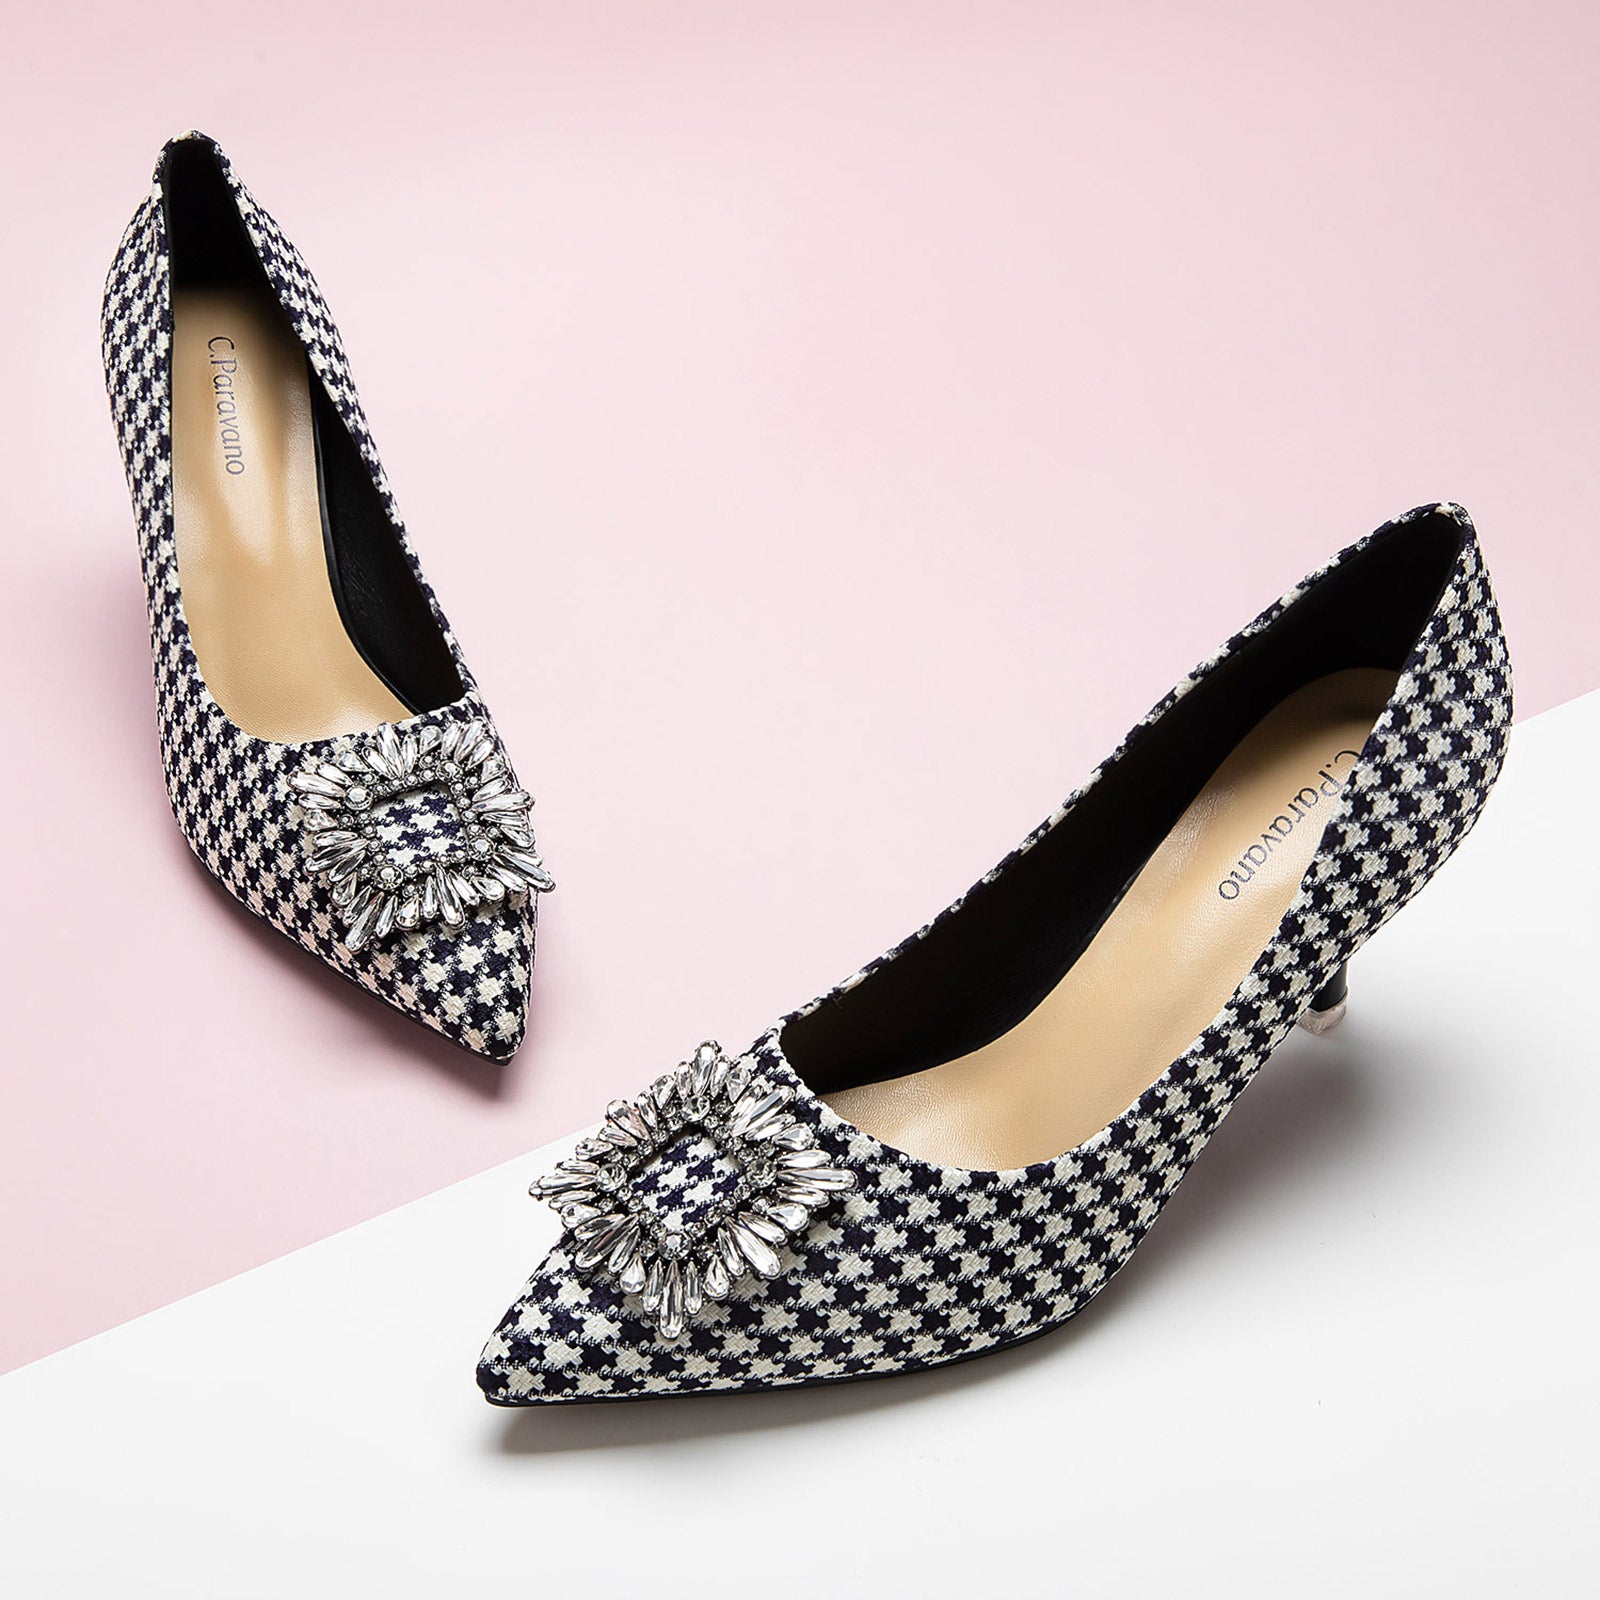  Houndstooth Tweed Pumps with an embellished square buckle, blending classic and contemporary styles